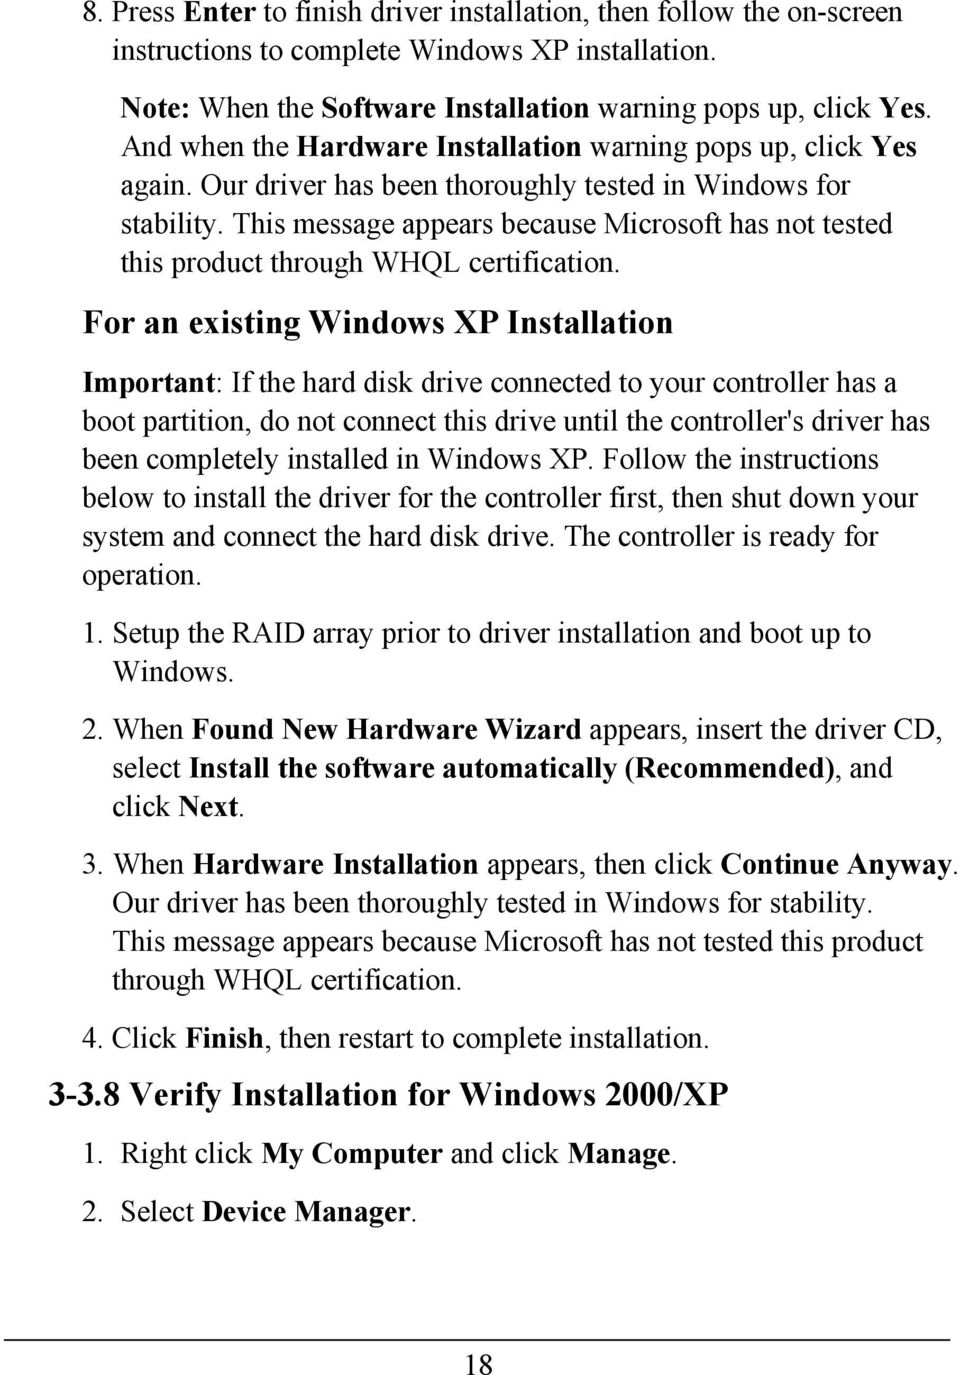 This message appears because Microsoft has not tested this product through WHQL certification.